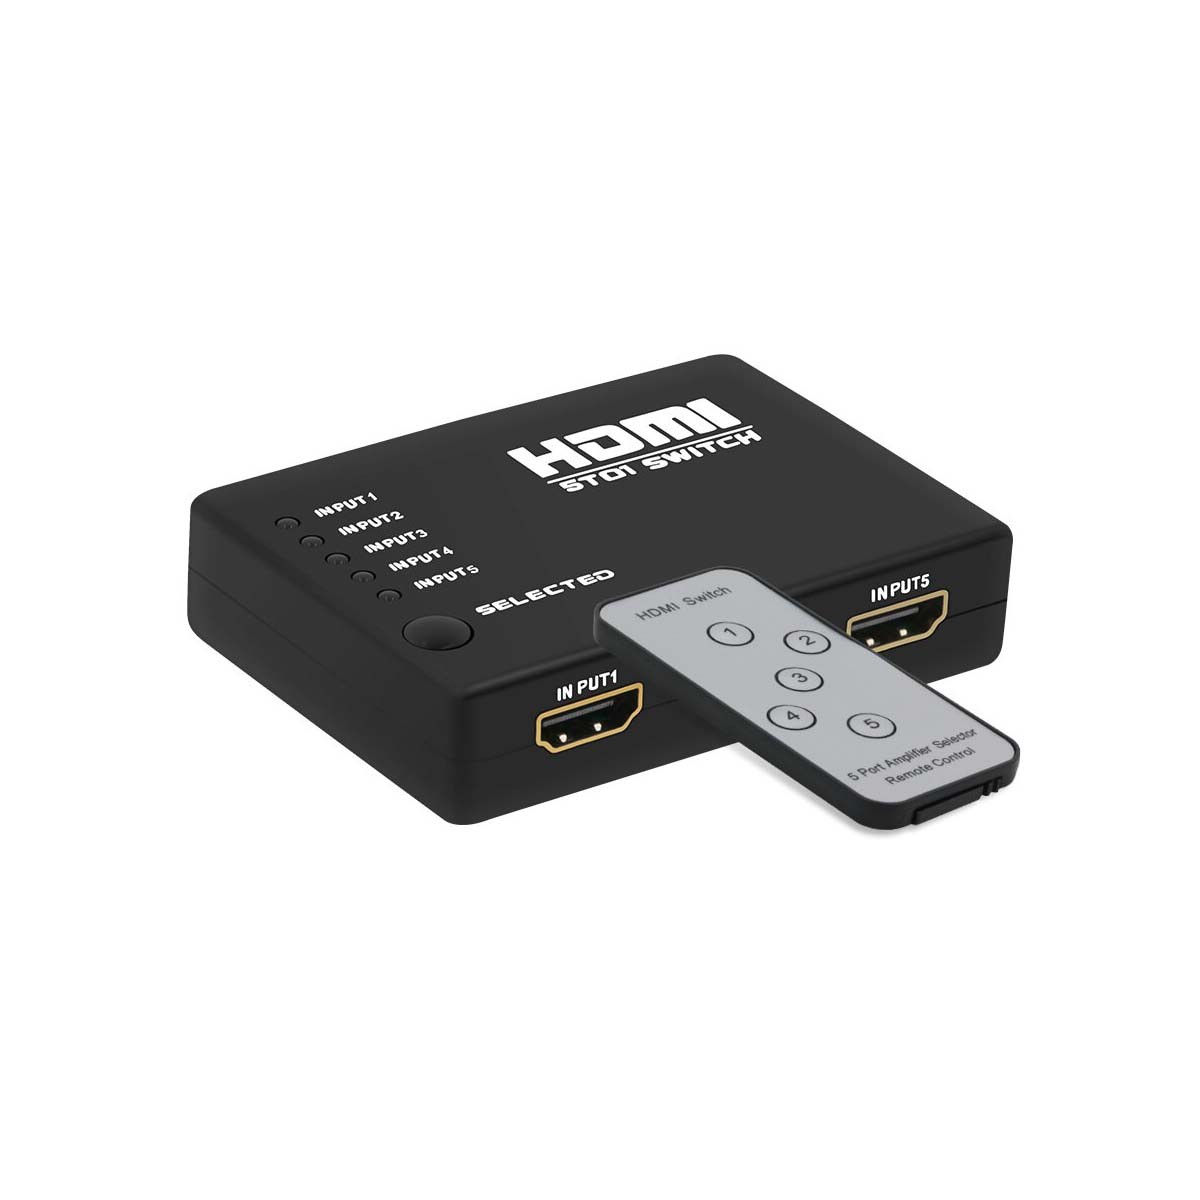 HDMI Switch with Remote Control